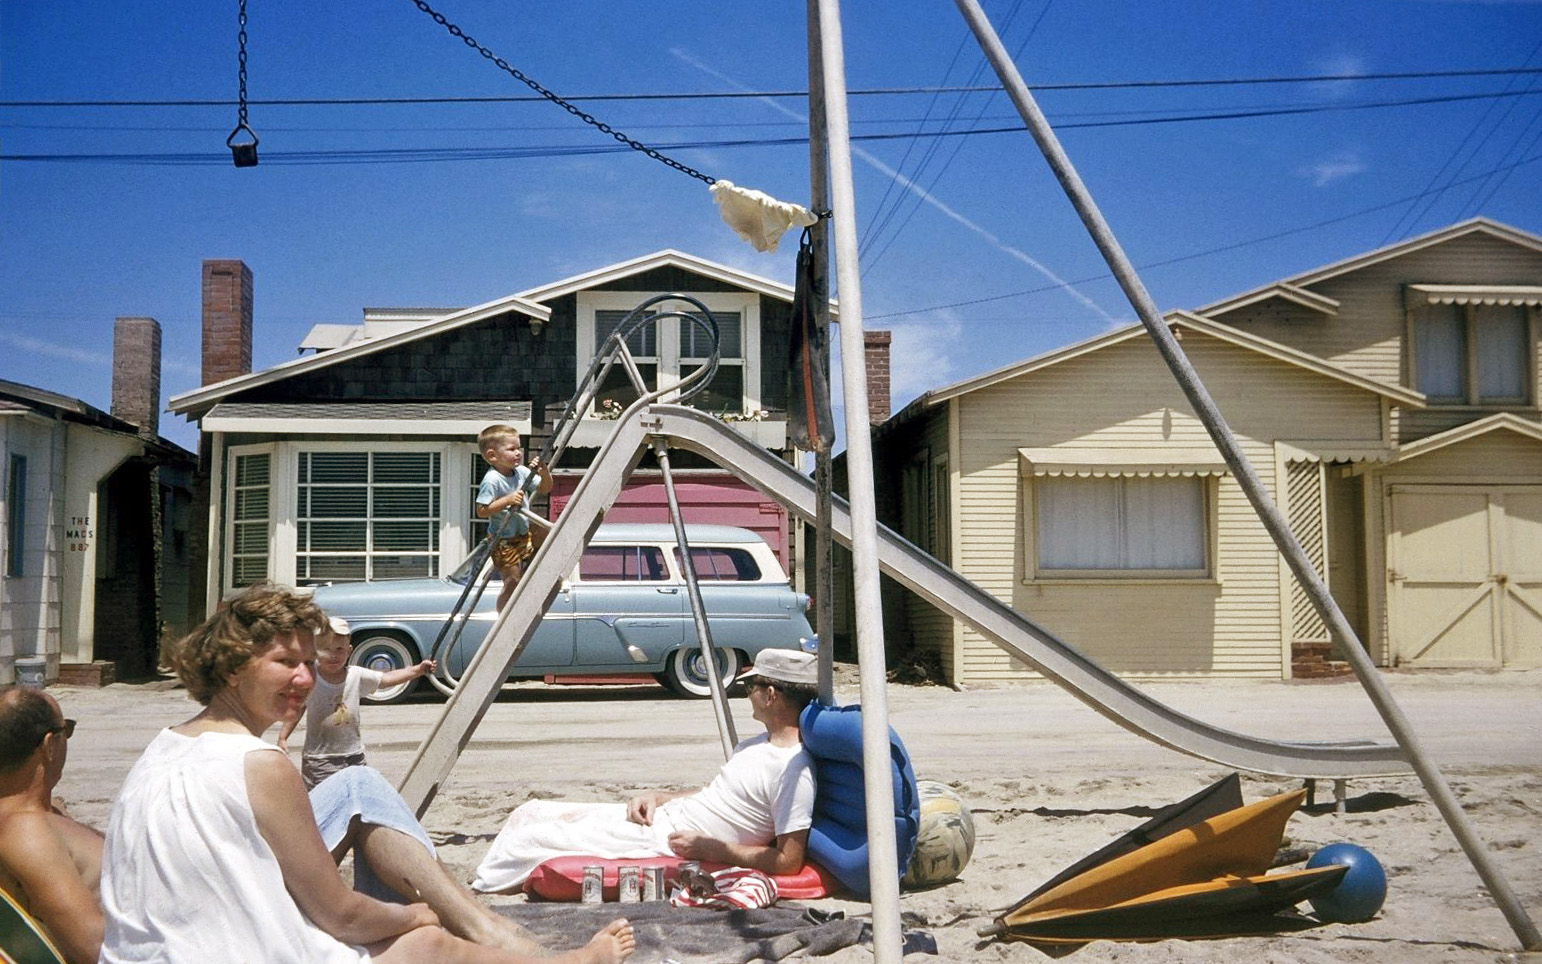 From circa 1958, a Kodachrome taken by my mother, who could handle a 35mm camera in a pinch. My parents had friends with a summer place in Seal Beach, California, a coastal community  on the border of Orange and Los Angeles counties. In the foreground are my parents' bosom pals who owned or rented the place behind the Ford station wagon. That's me at the bottom of the slide; the boy making his precarious way up is the son of the aforementioned couple. Dad (with the cap) appears to be zoning out, judging by the beer cans by his side. I wonder if any of these beachside homes exist today. View full size.